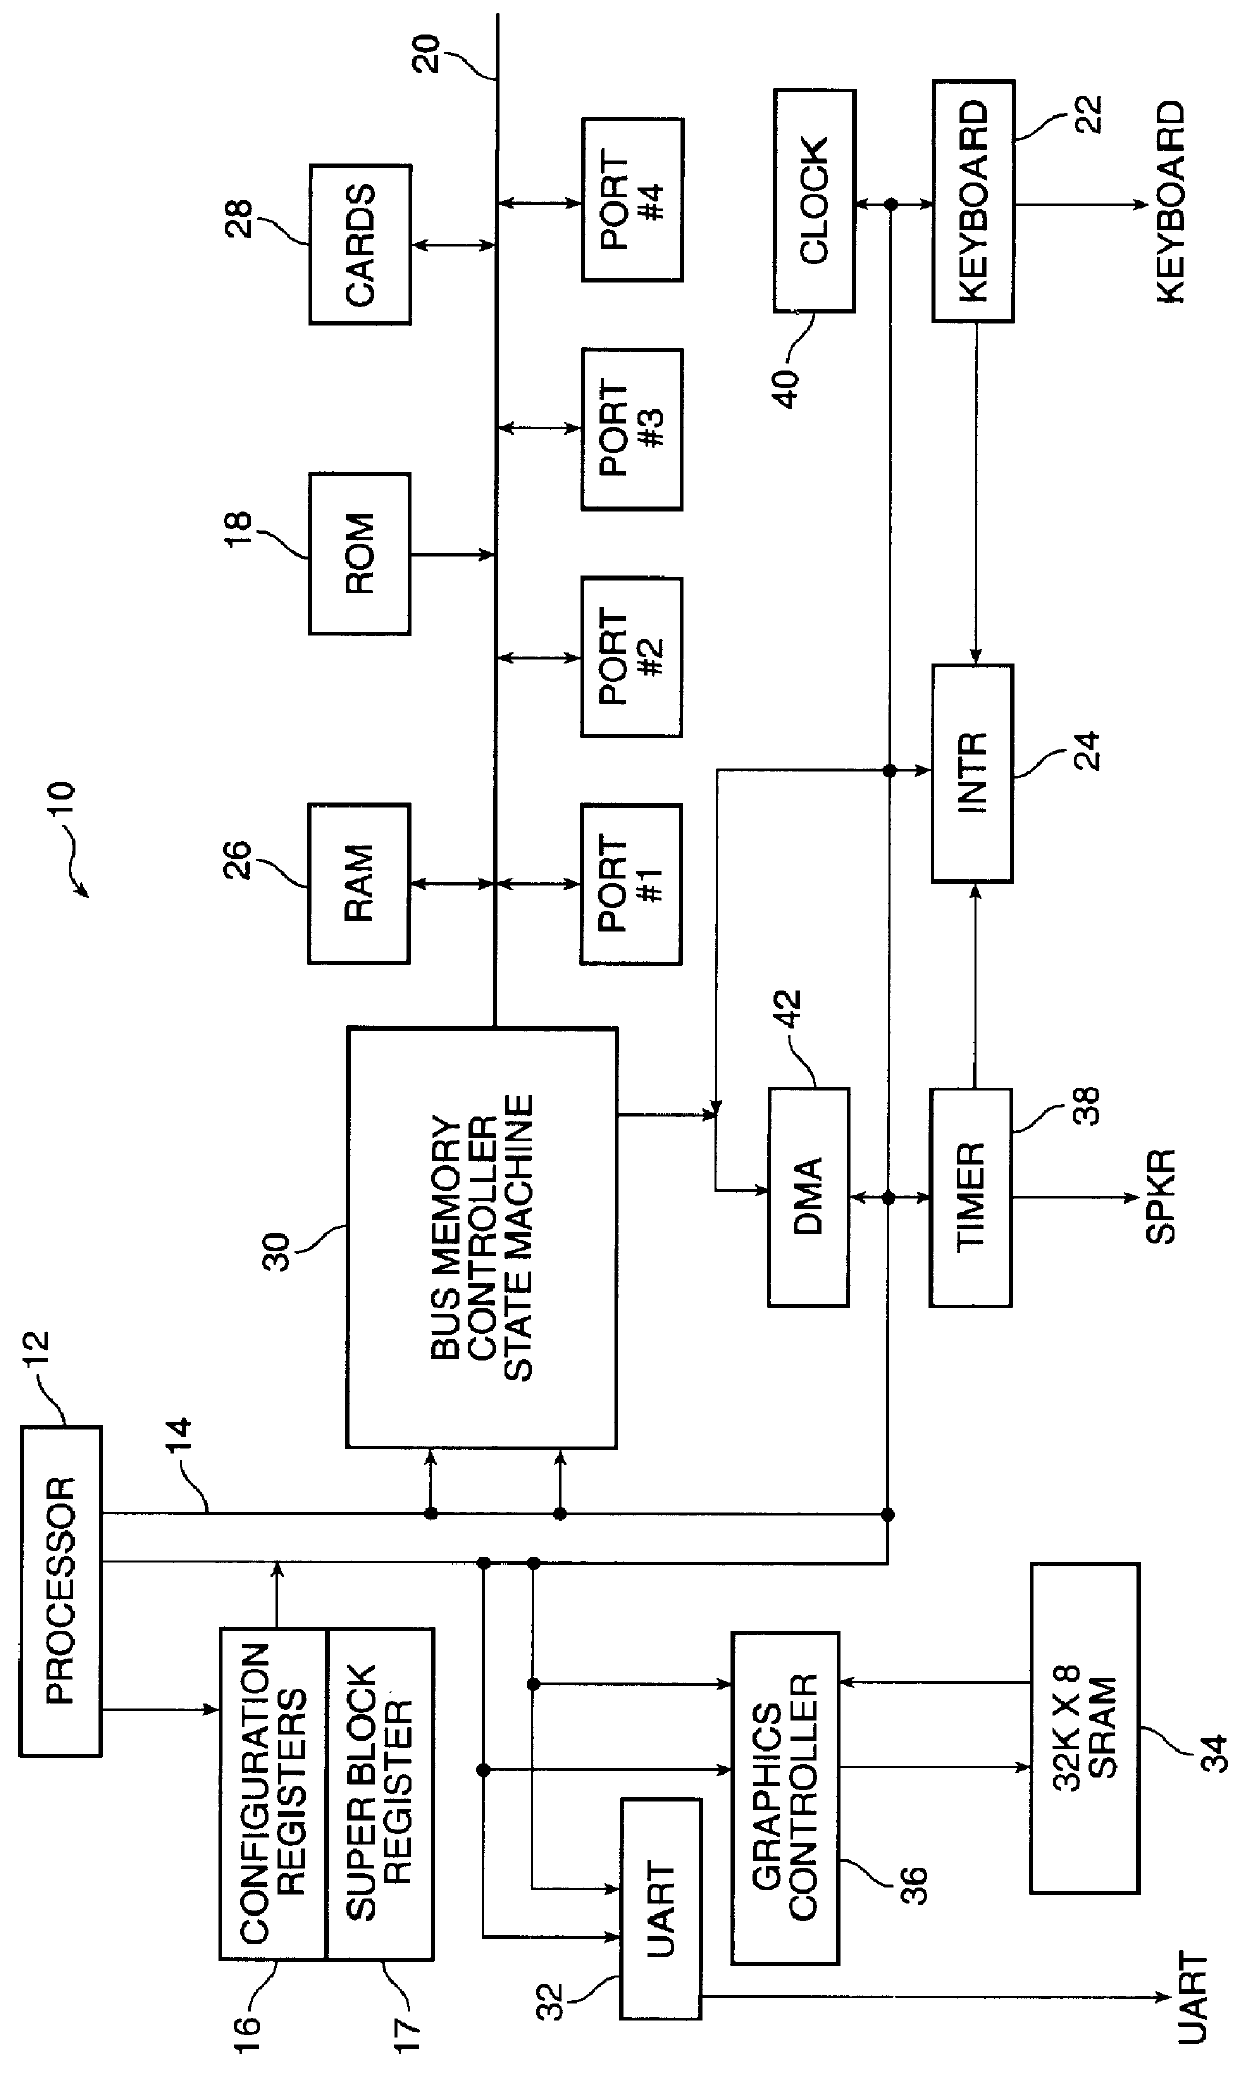 A system for performing input and output operations to and from a processor